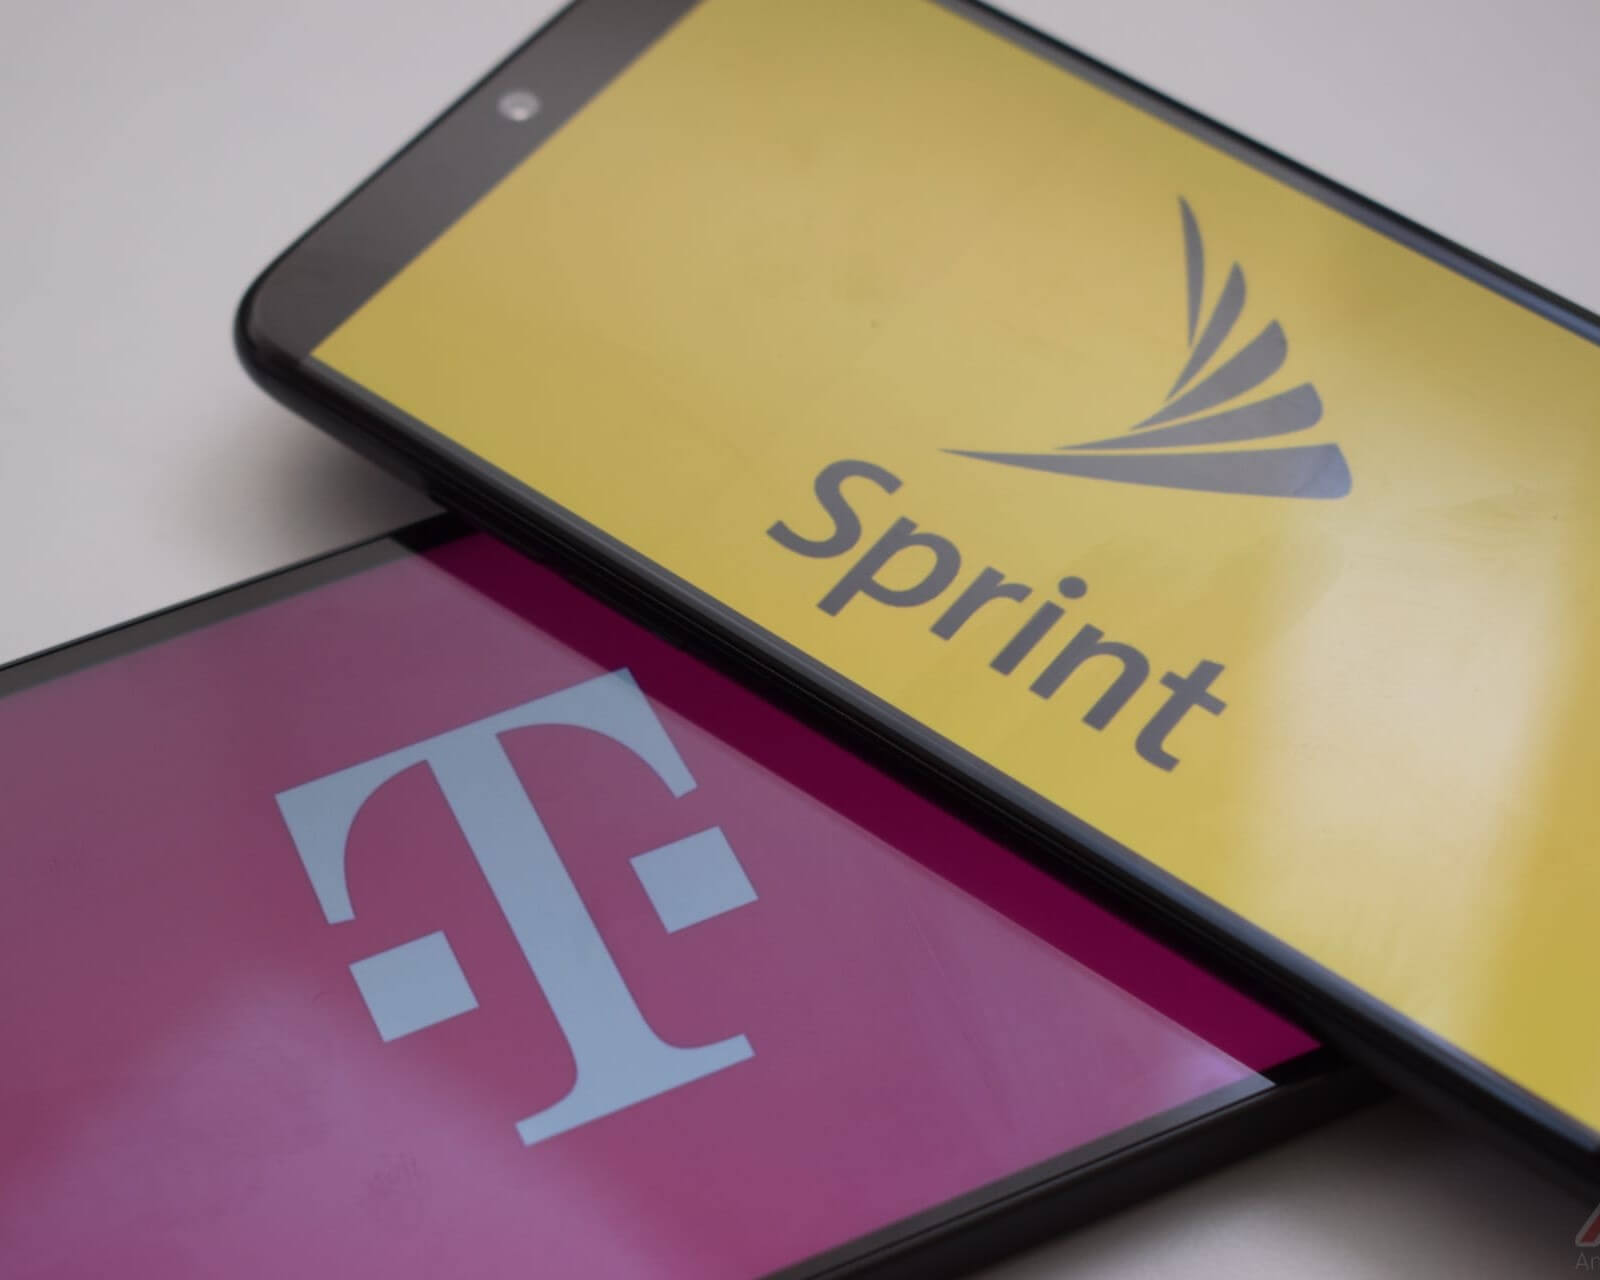 SPRINT AND T-MOBILE MERGER MAY COST RETAIL EMPLOYEES A PERCENTAGE OF THEIR WAGES